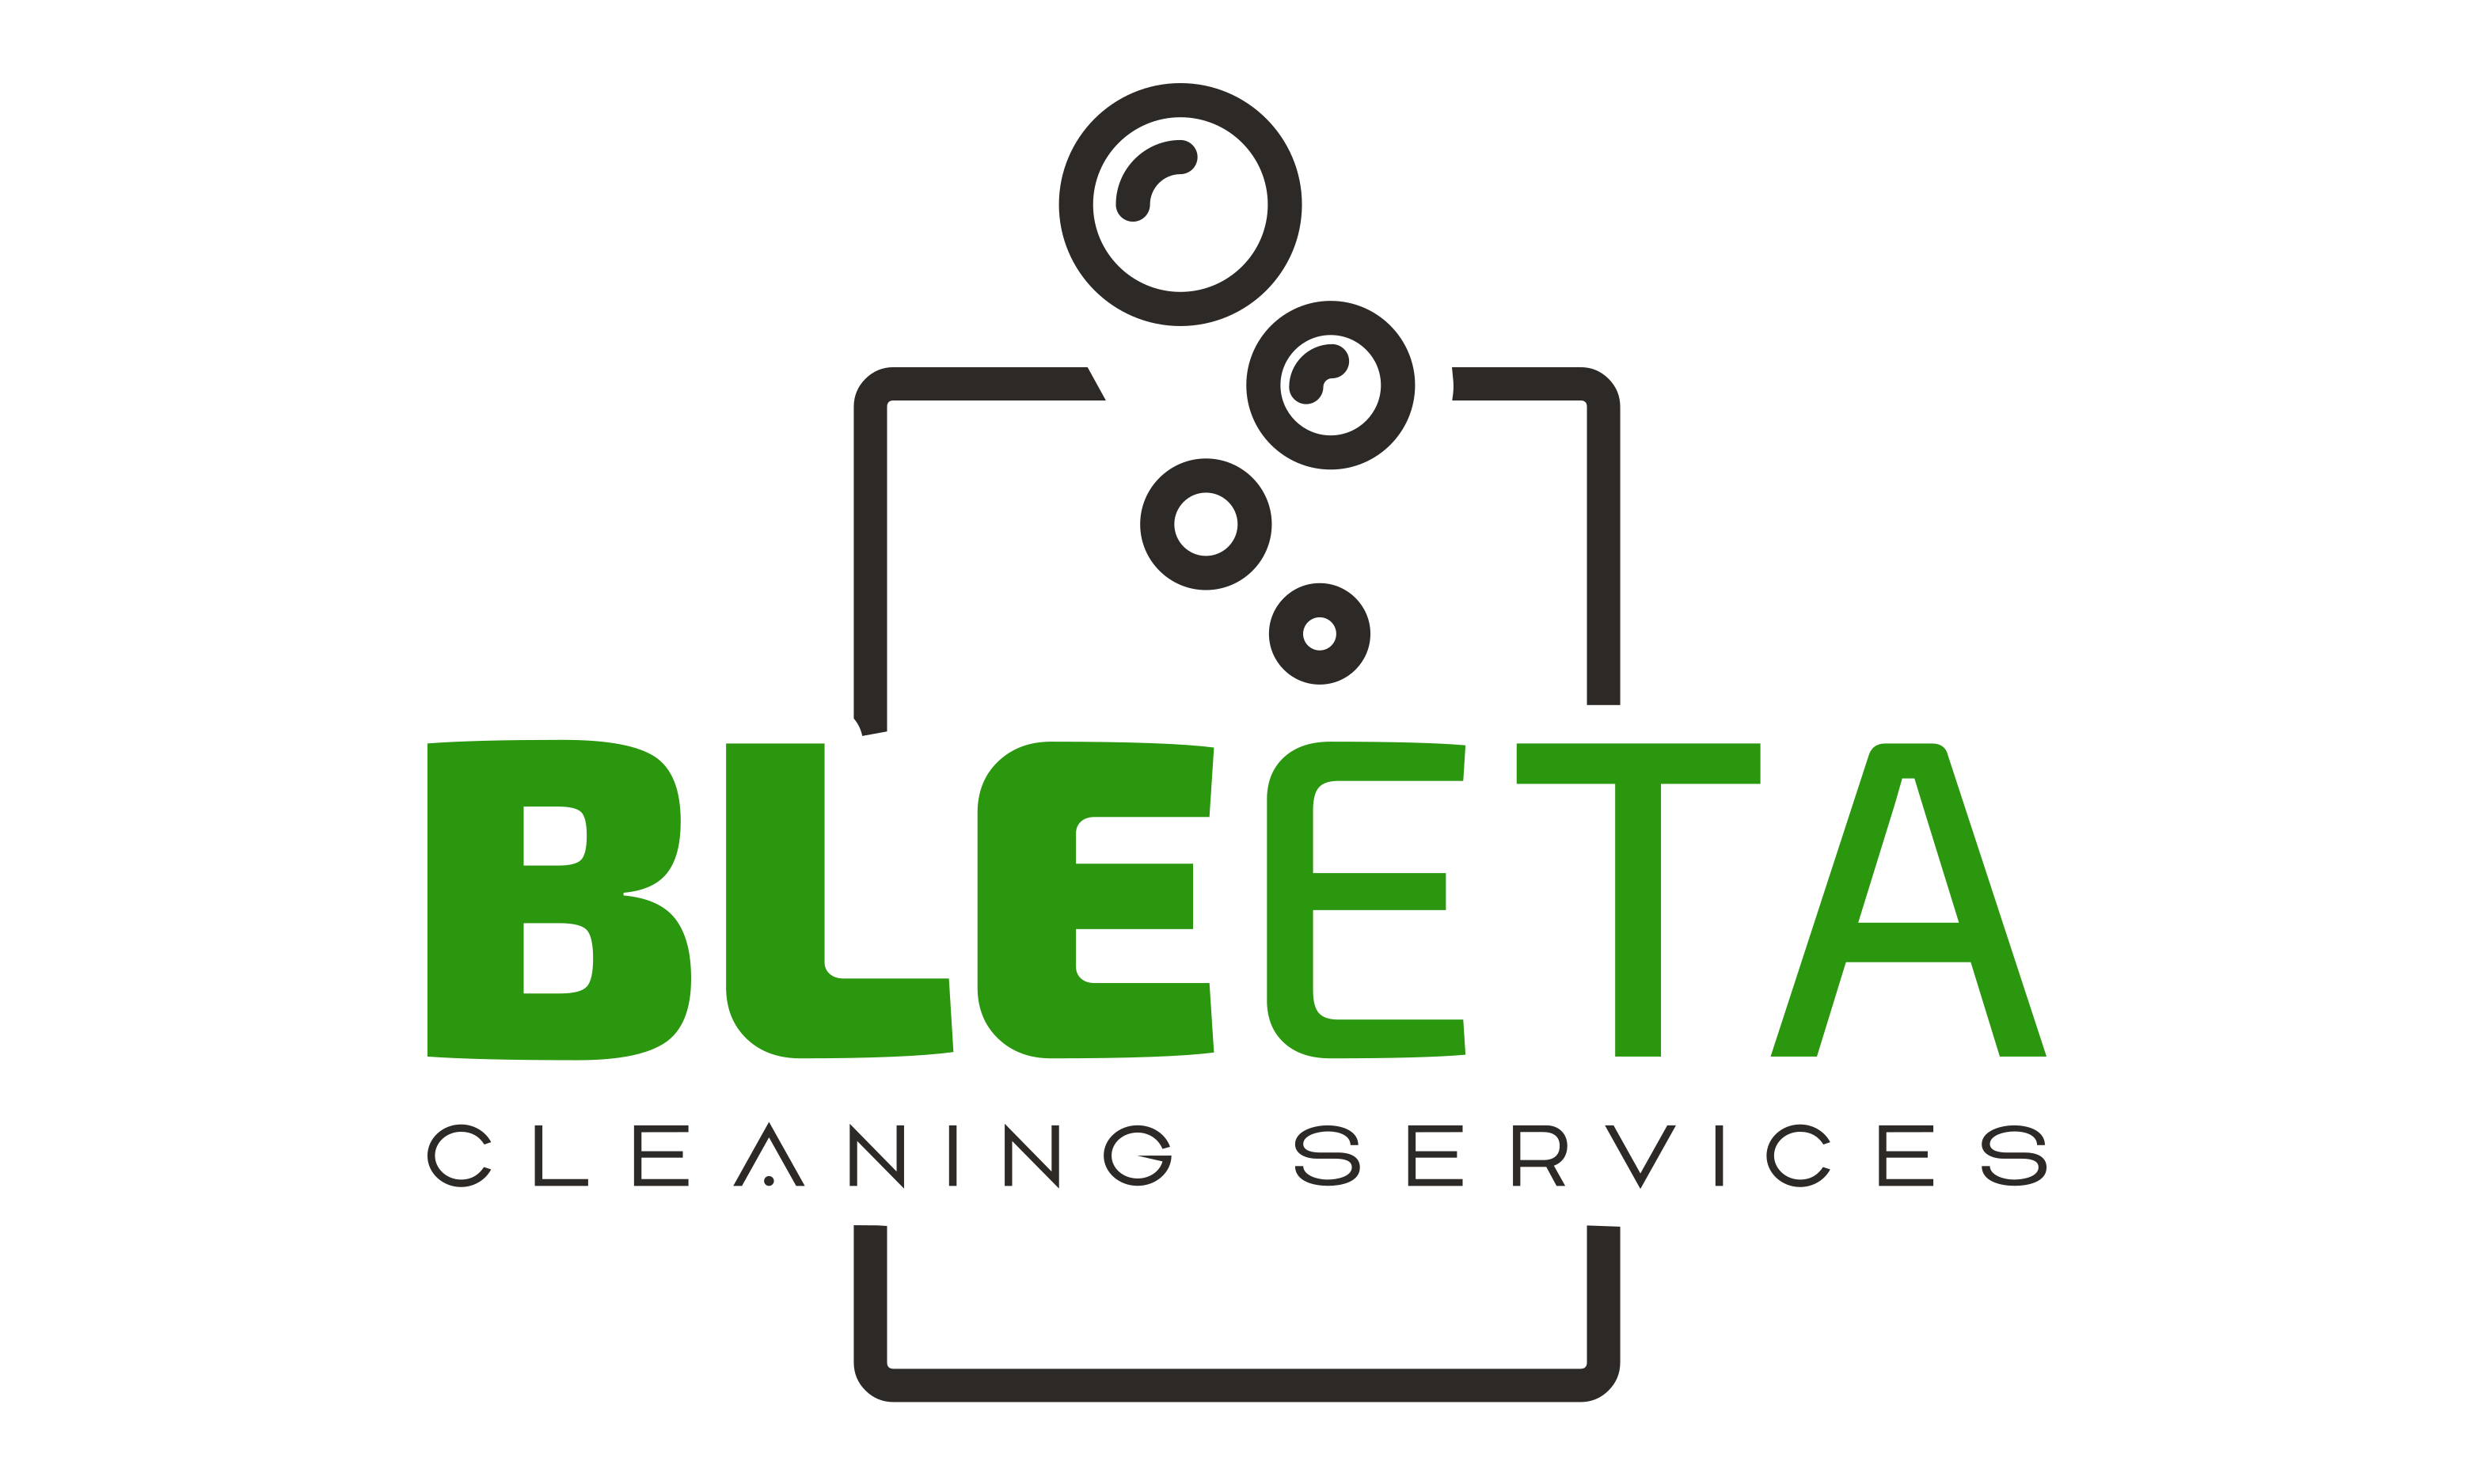 Bleeta Cleaning Services Logo